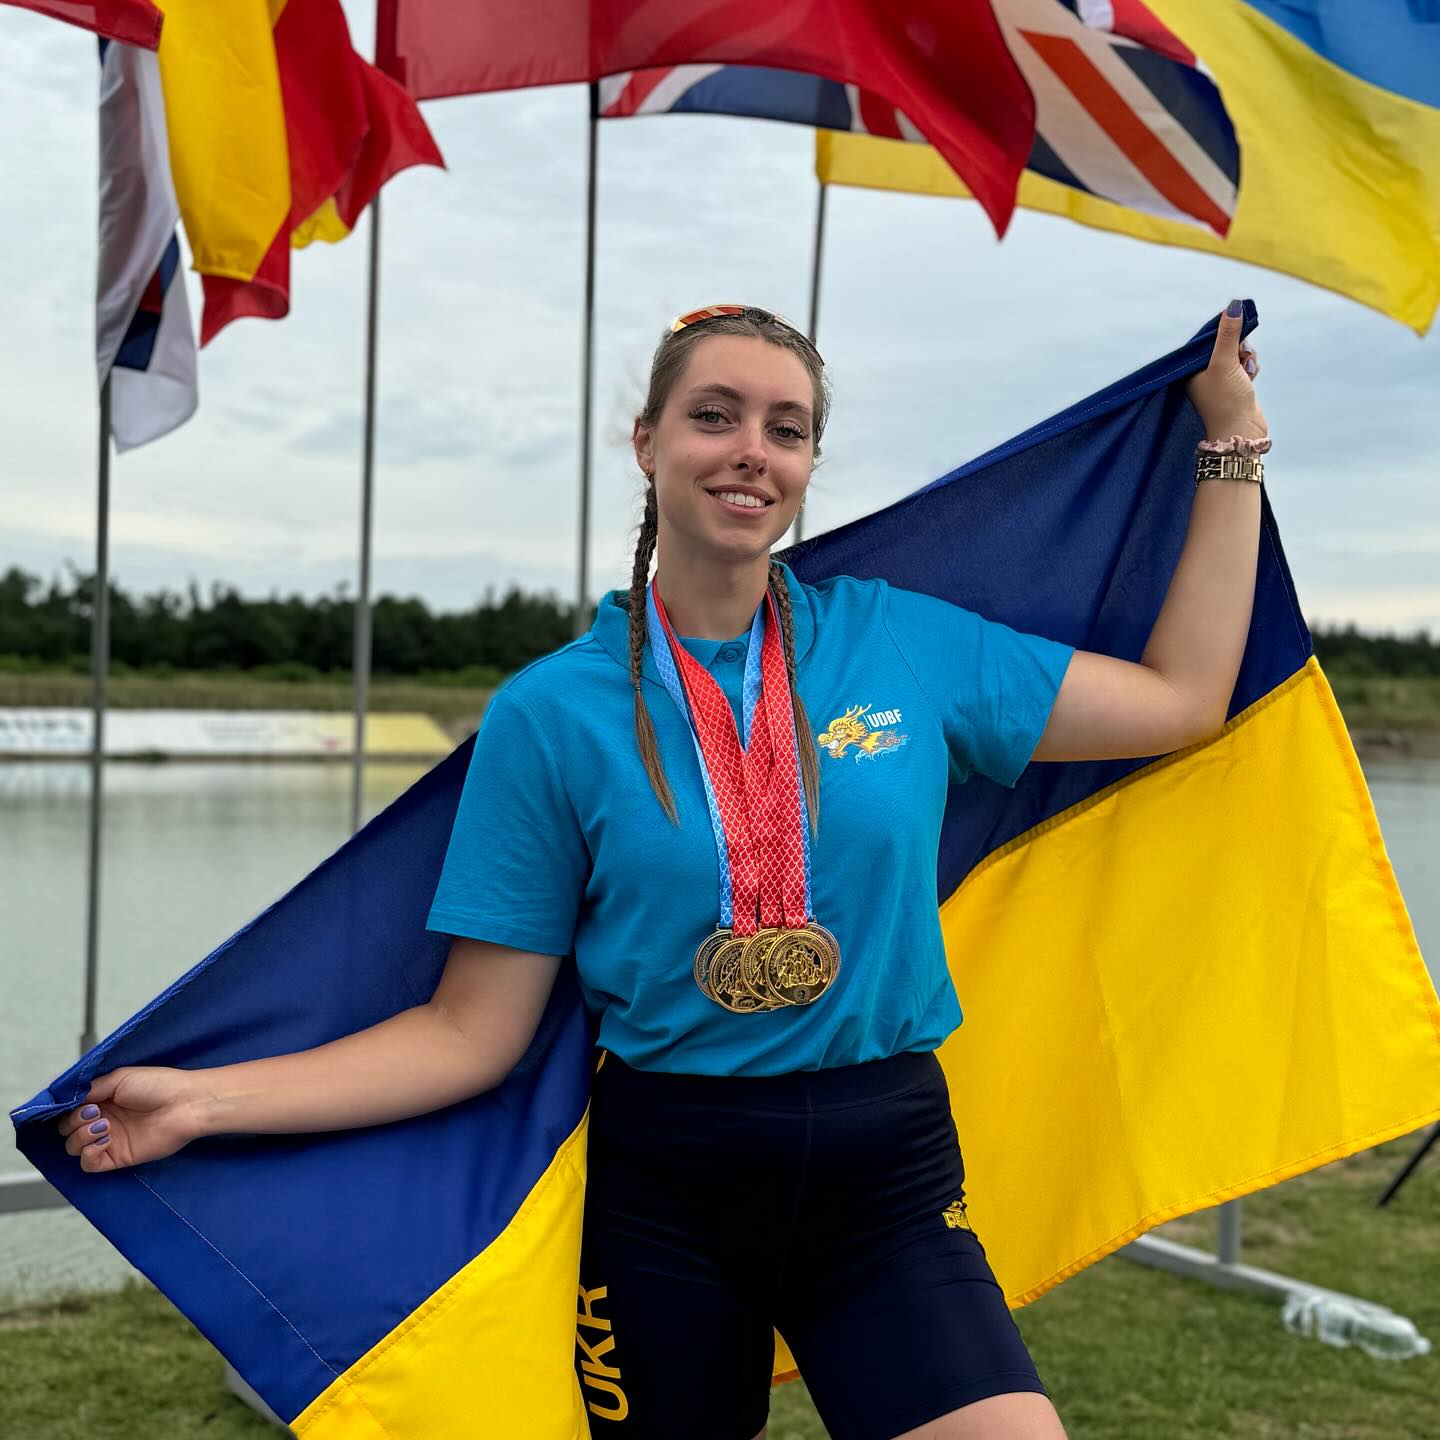 Student of FPCS Kateryna Petrenko wins a set of awards at the European Dragon Boat Championships